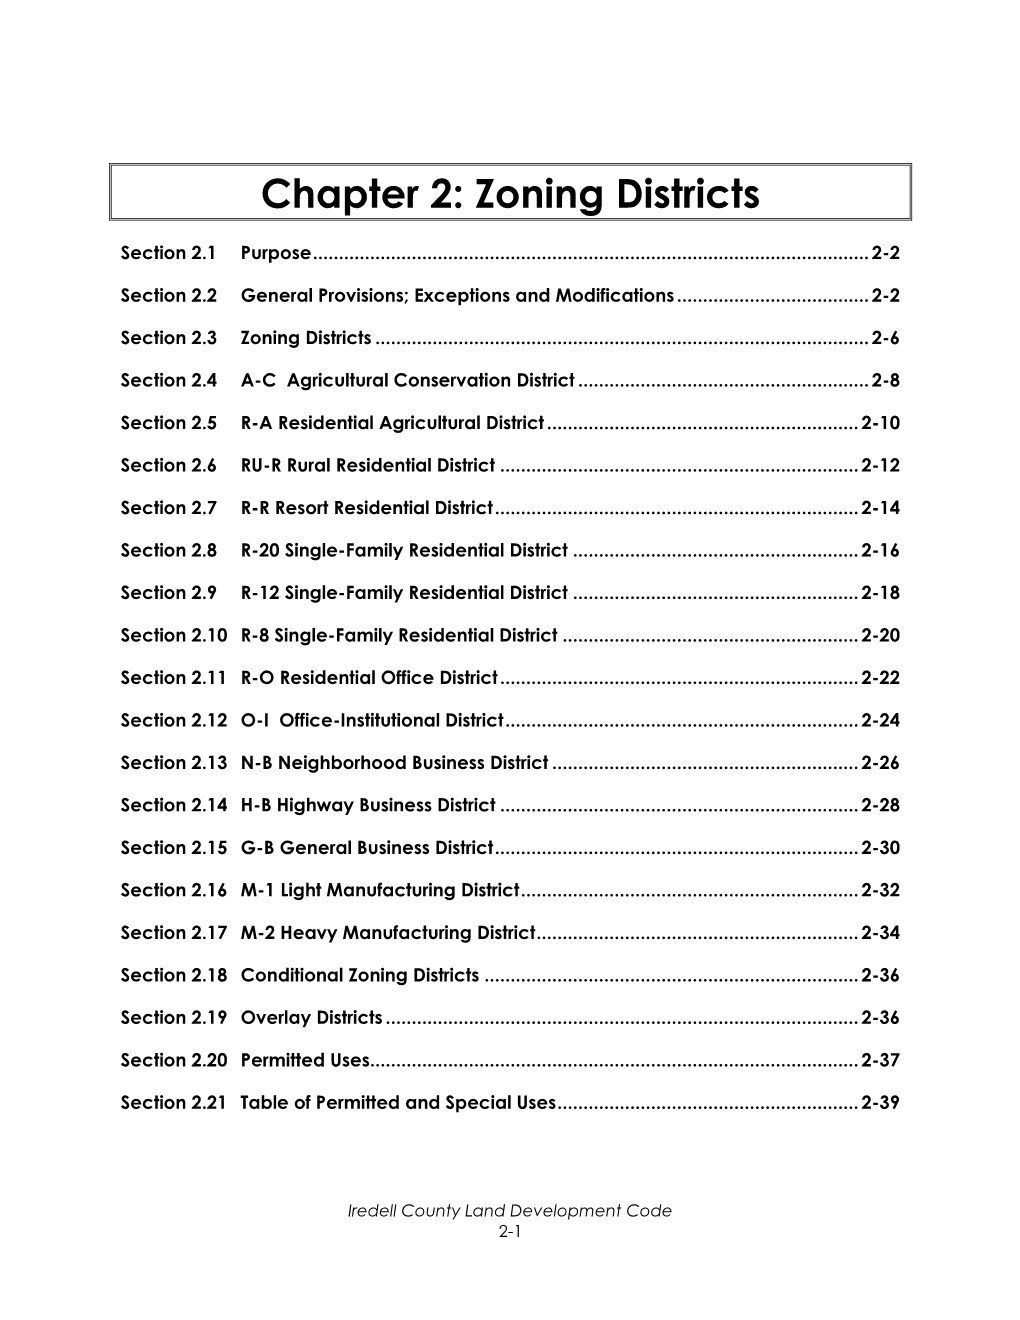 Chapter 2 Zoning Districts